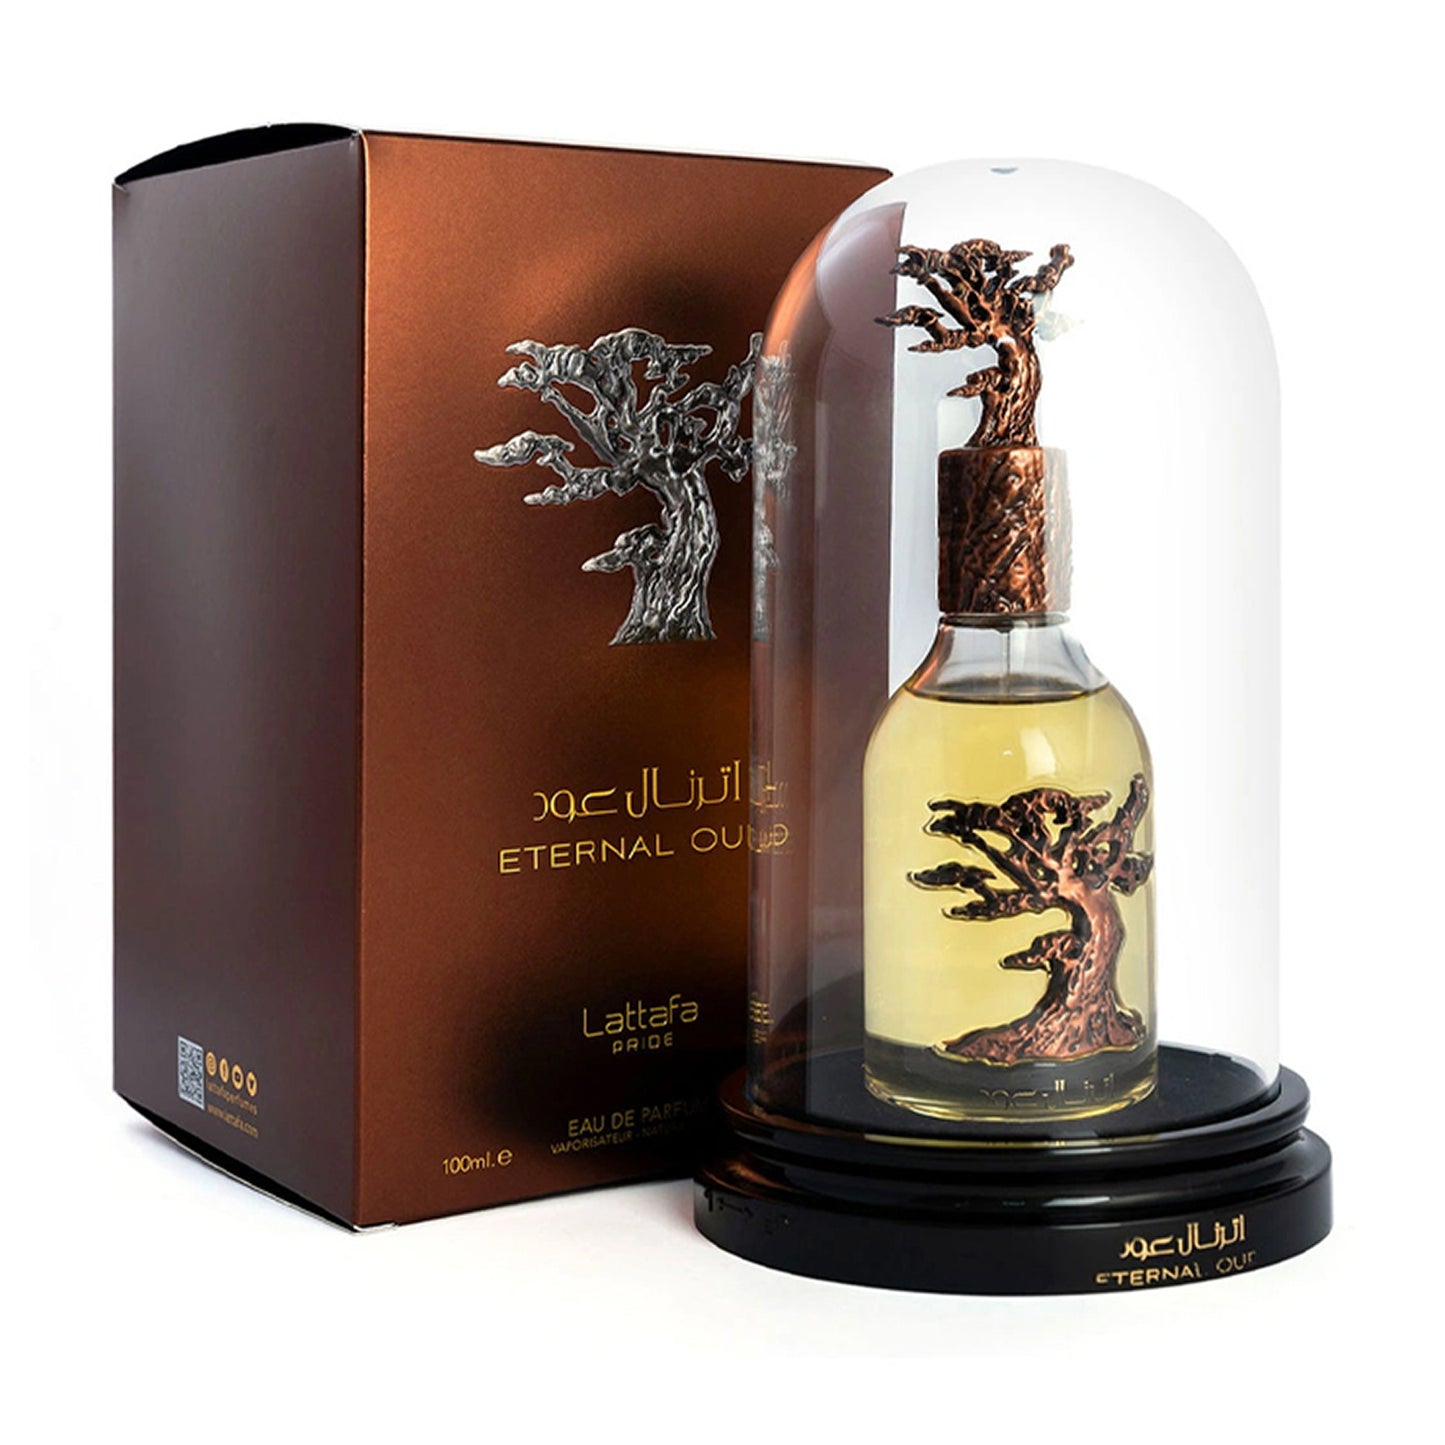 Eternal Oud EDP - 100ml - Lattafa Pride Elite Collection - Balanced scent with Amber, Sweet, Powdery Fruit, and warm Oud